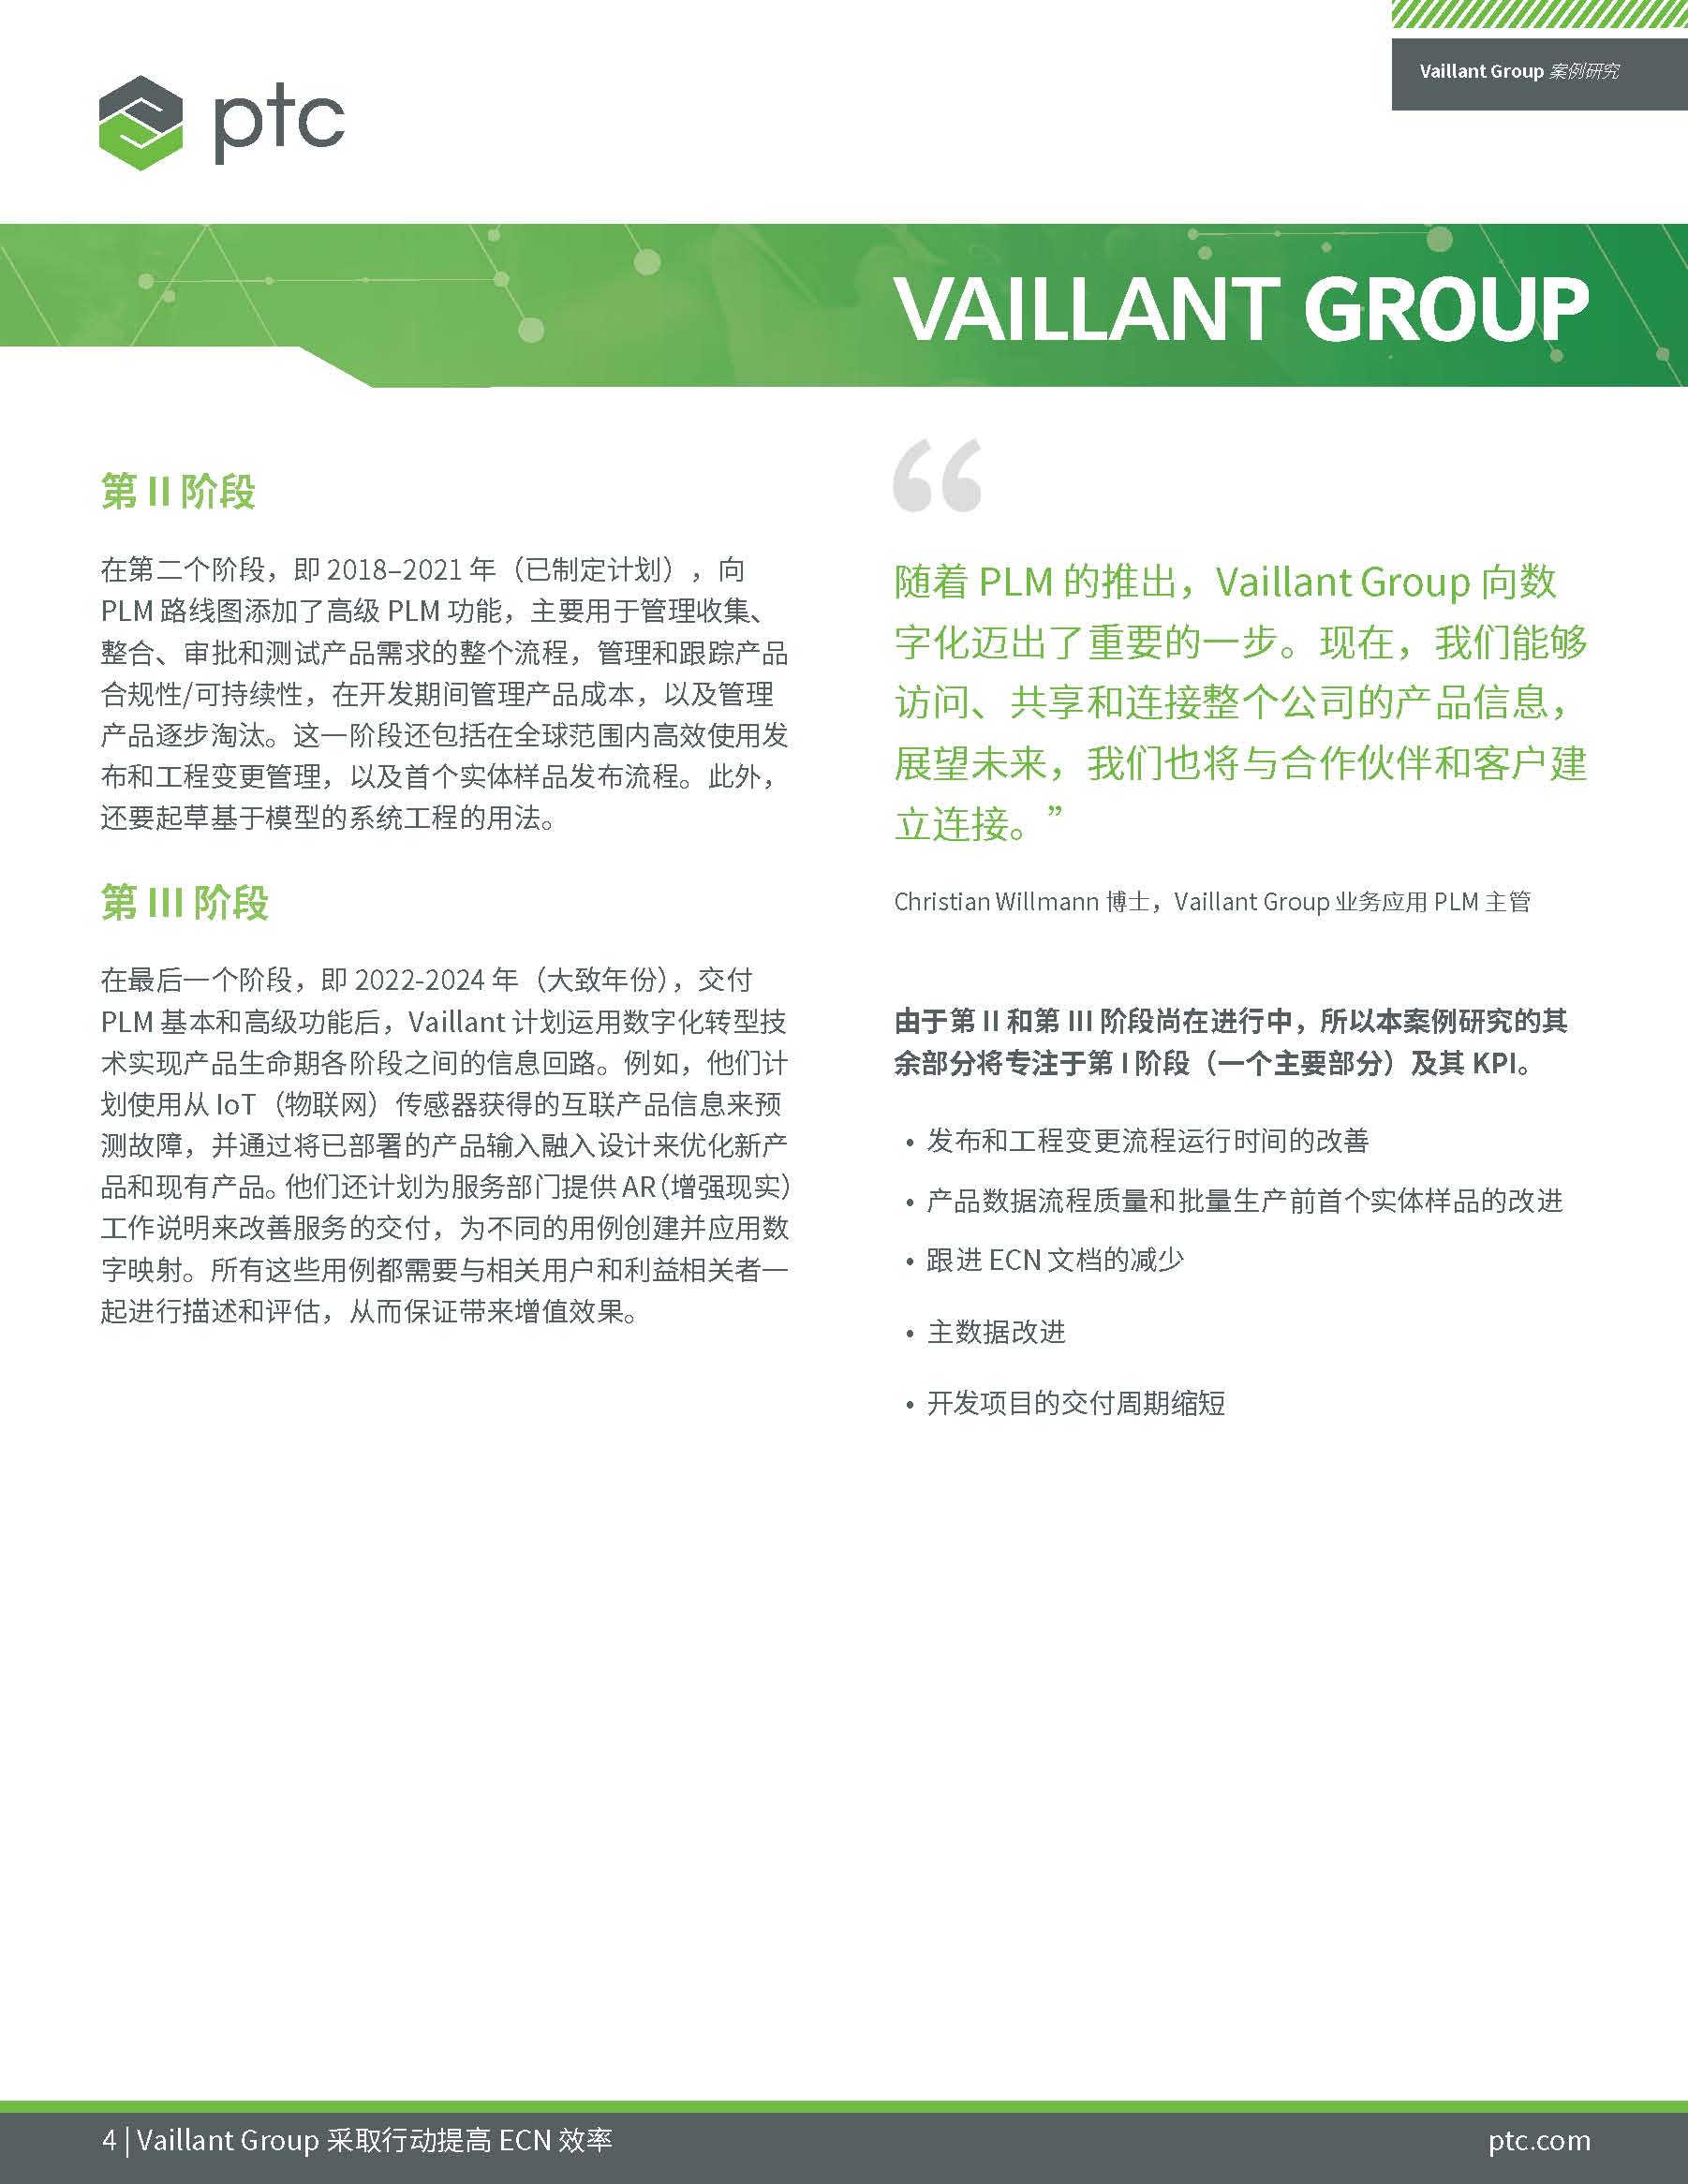 Vaillant Group's Digital Transformation (Chinese)_页面_04.jpg